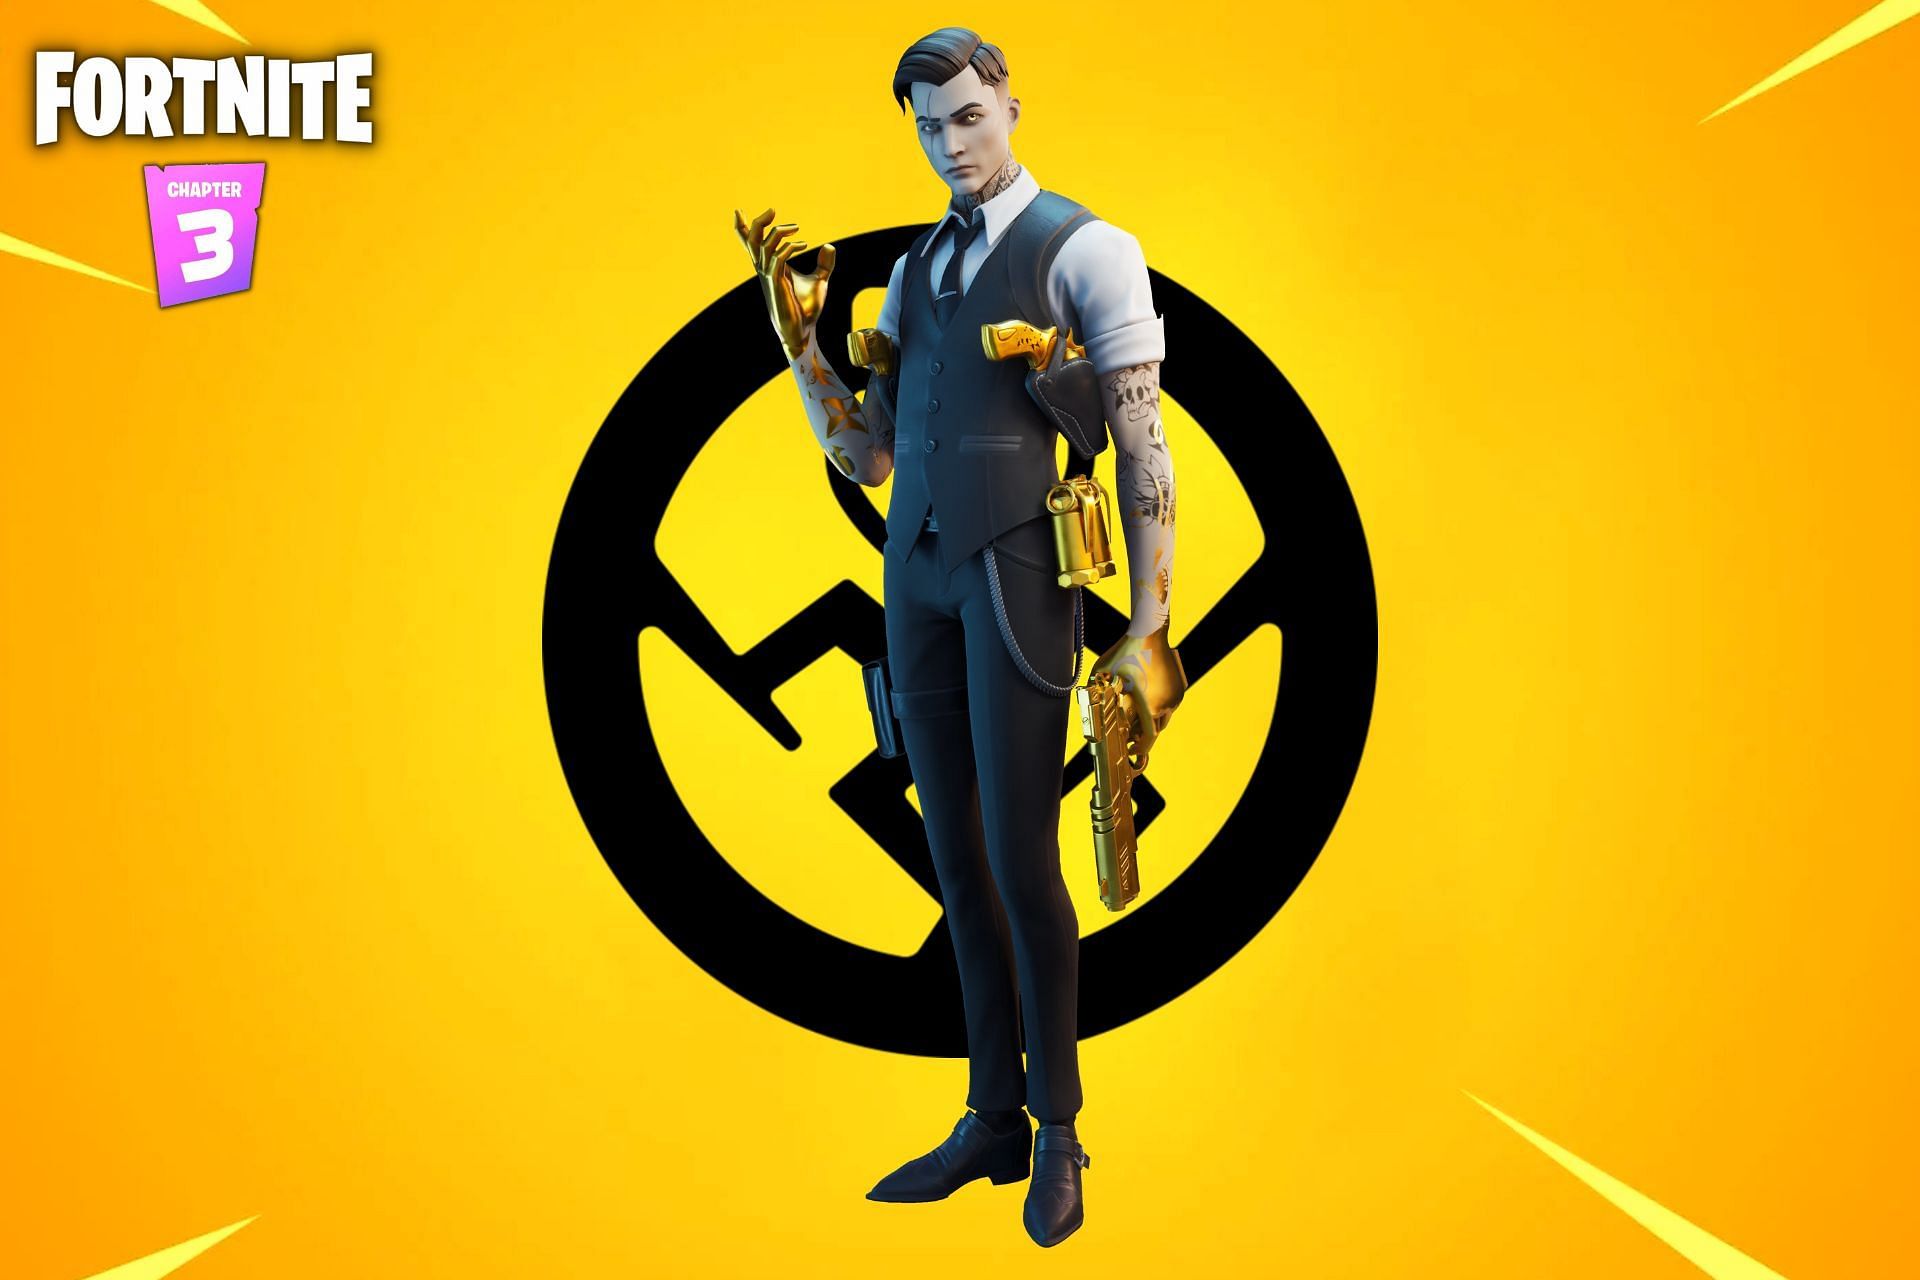 The GHOST flags suggest that Midas will return to Fortnite, the only question is when? (Image via Sportskeeda)